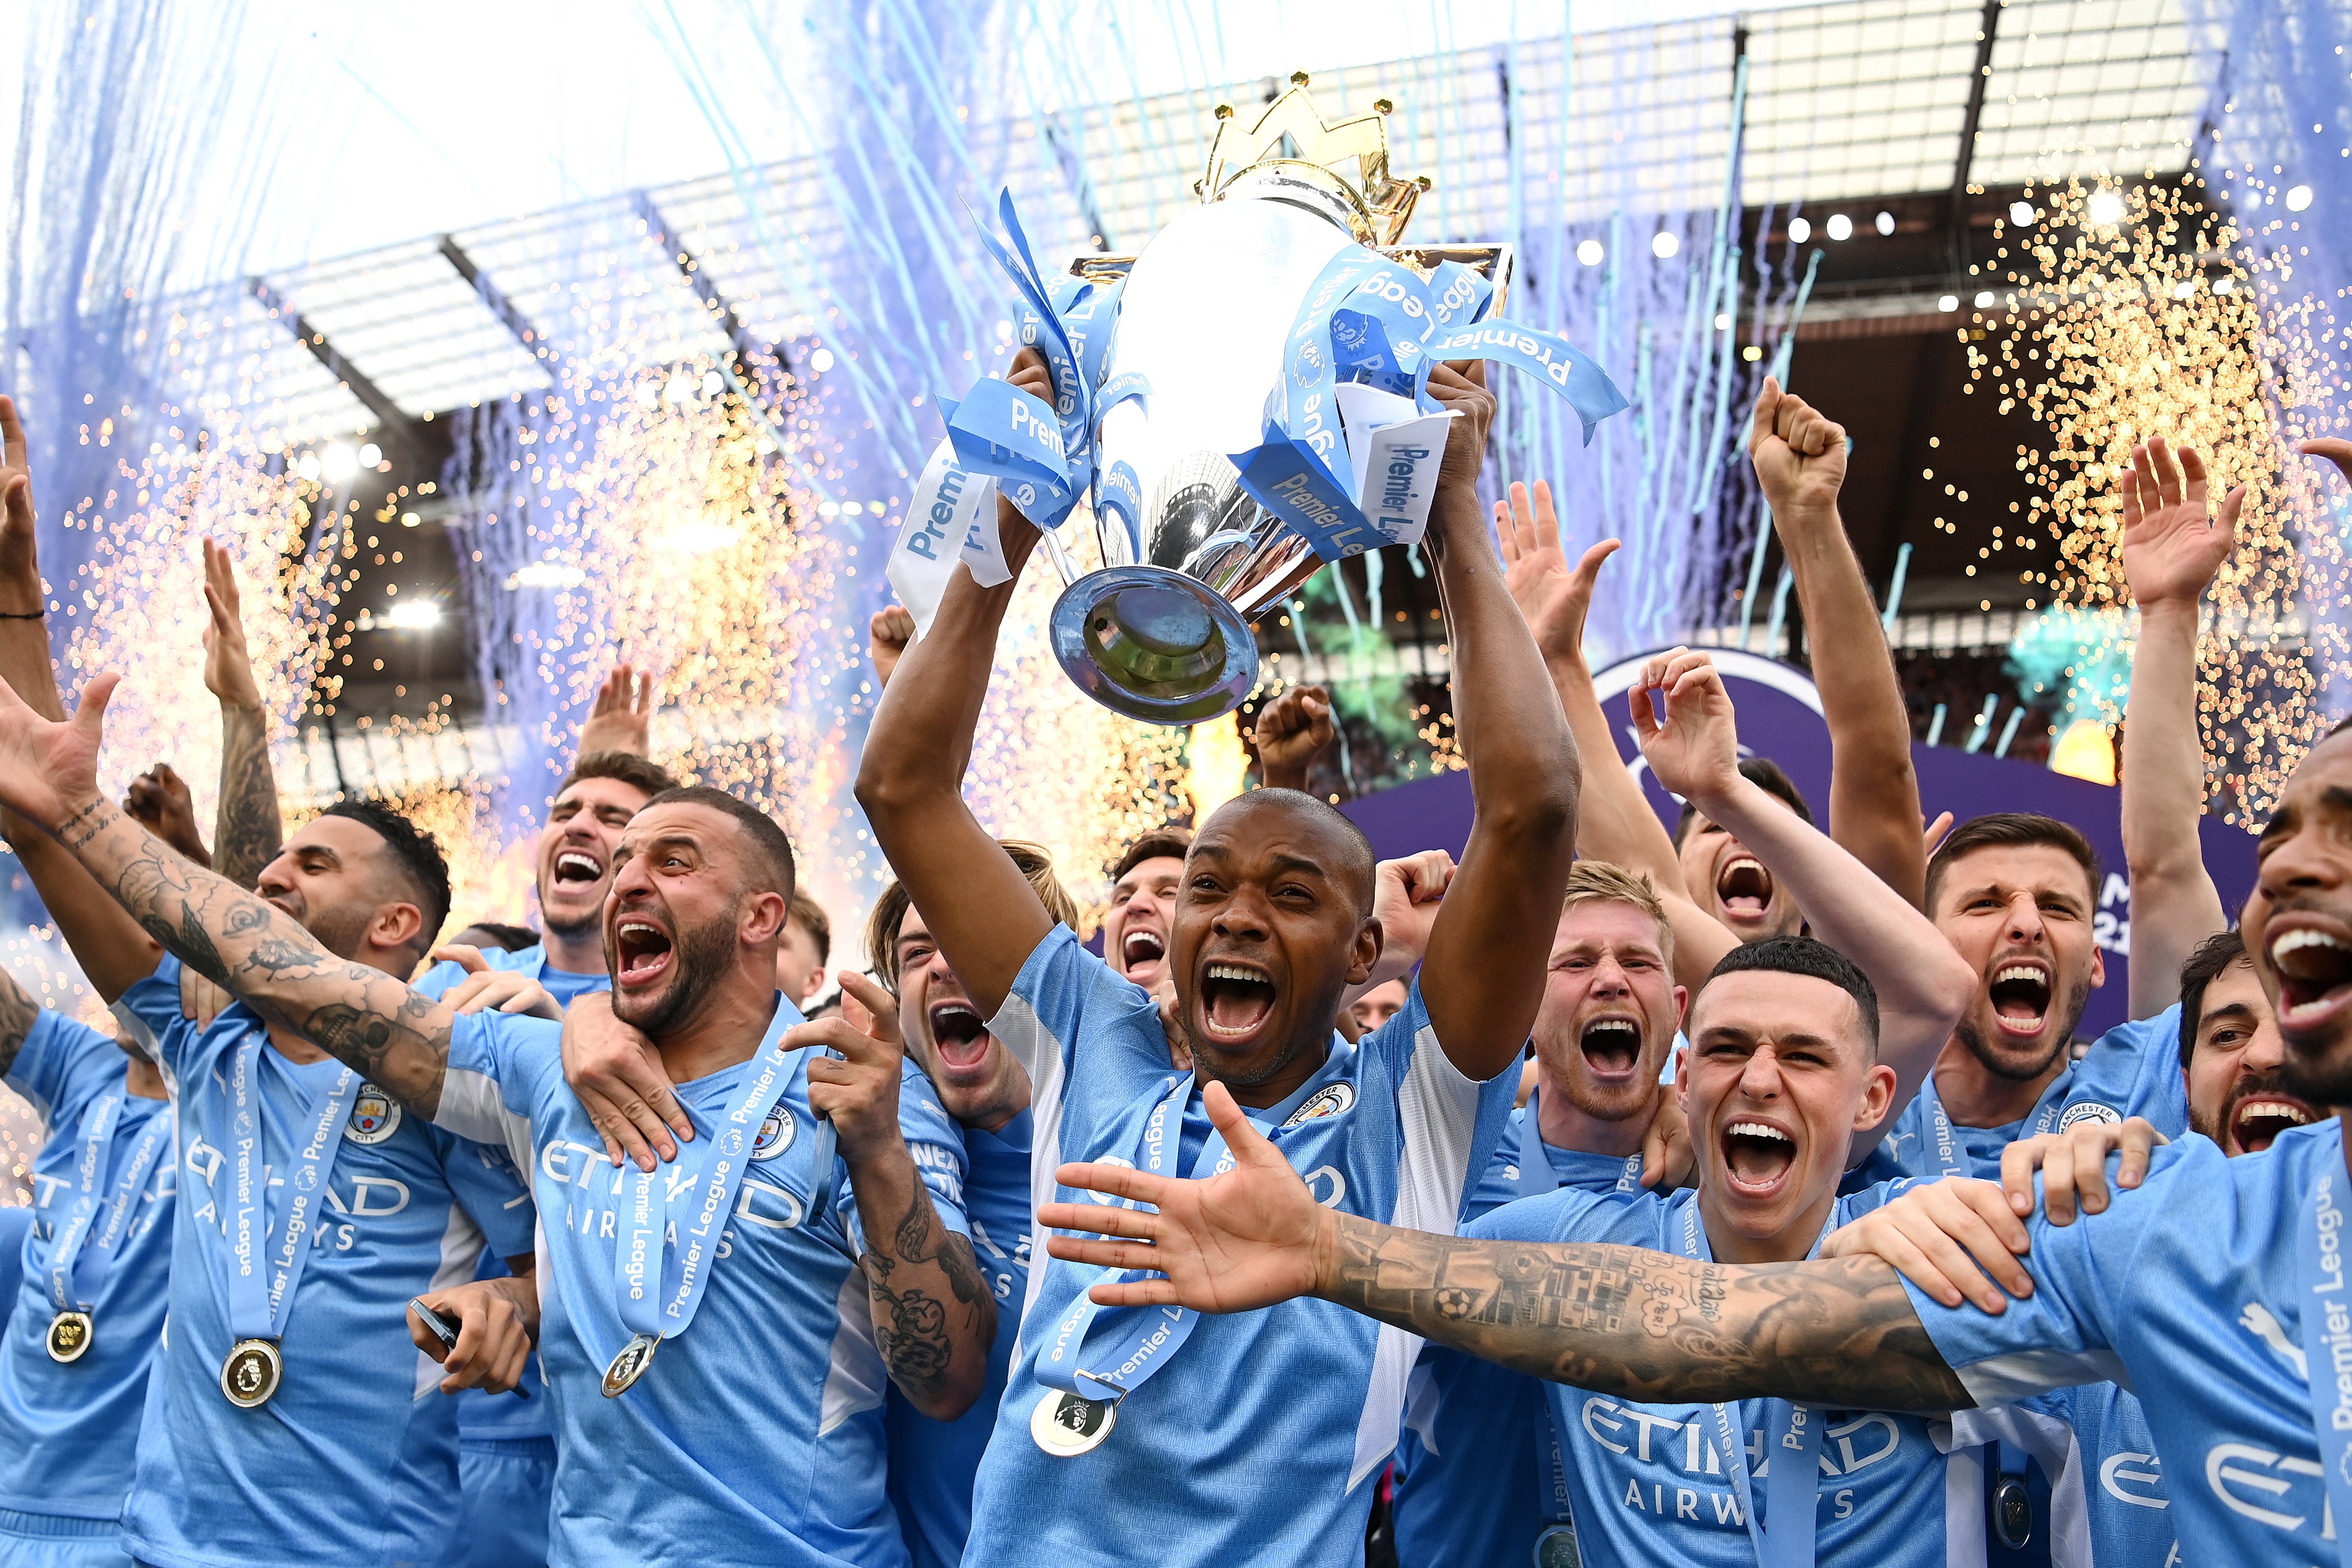 The fixture list for the 2022/23 Premier League season has been confirmed